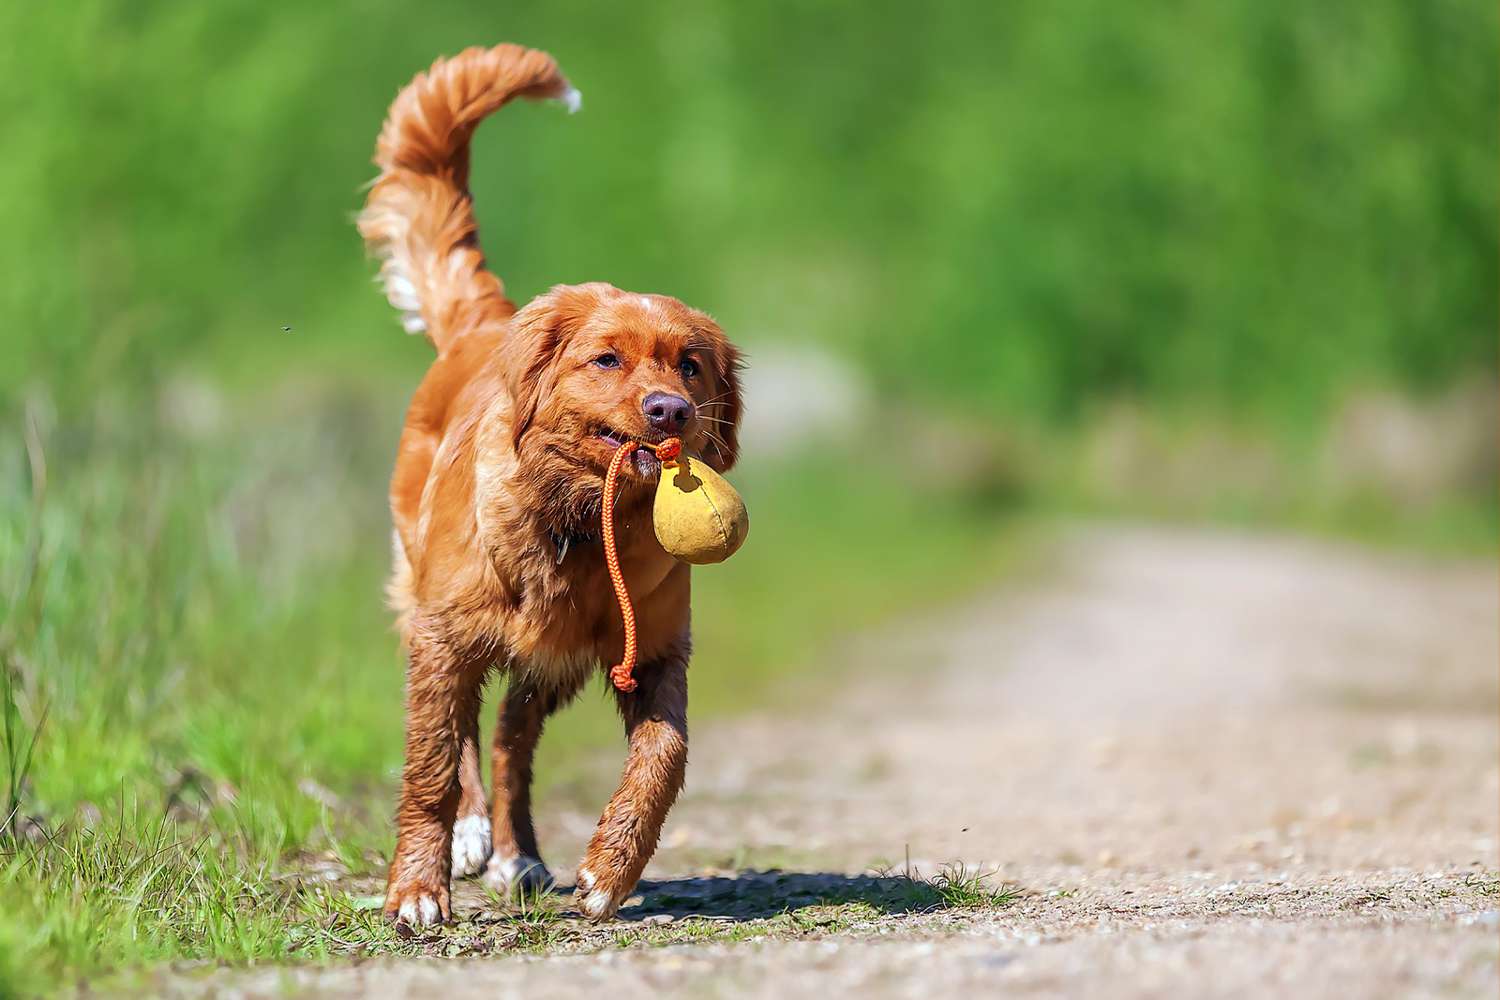 nova scotia duck tolling retriever carrying yellow toy in mouth